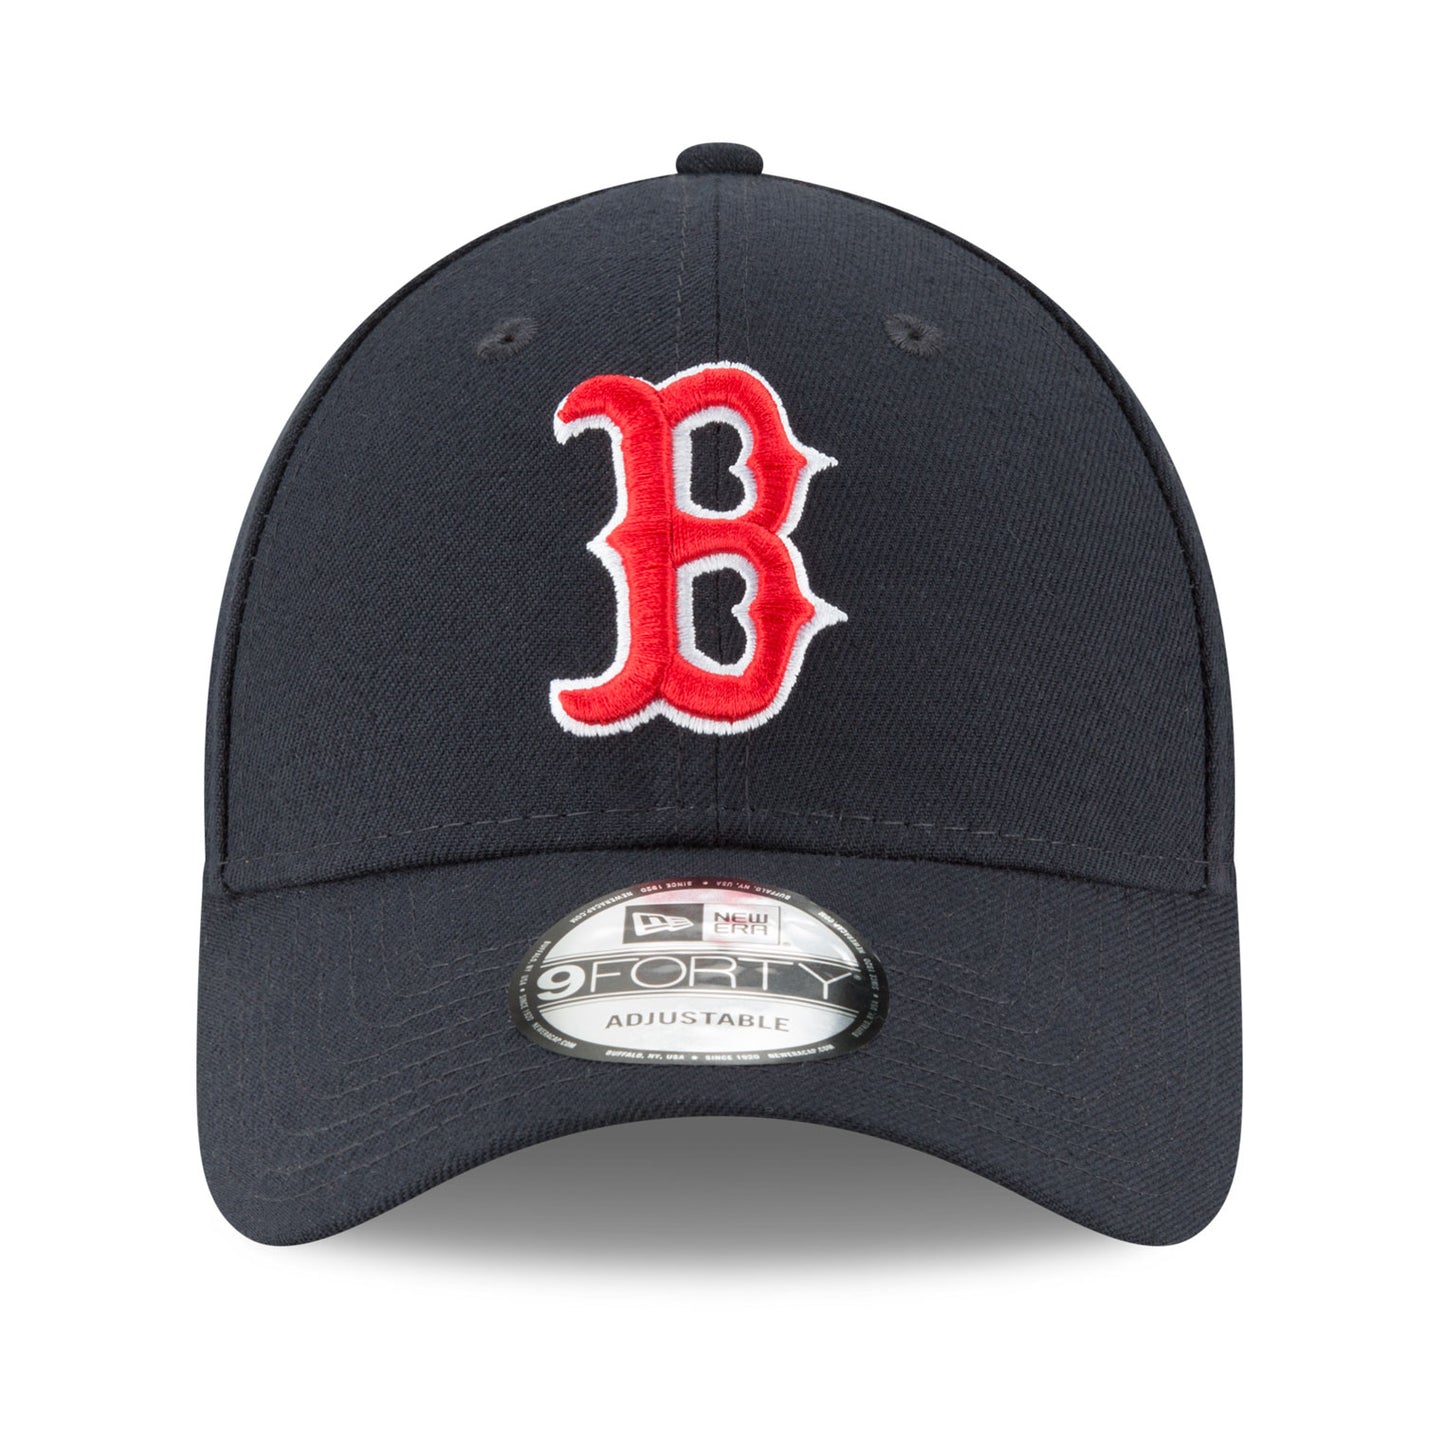 THE LEAGUE Boston Red Sox 9FORTY New Era Cap